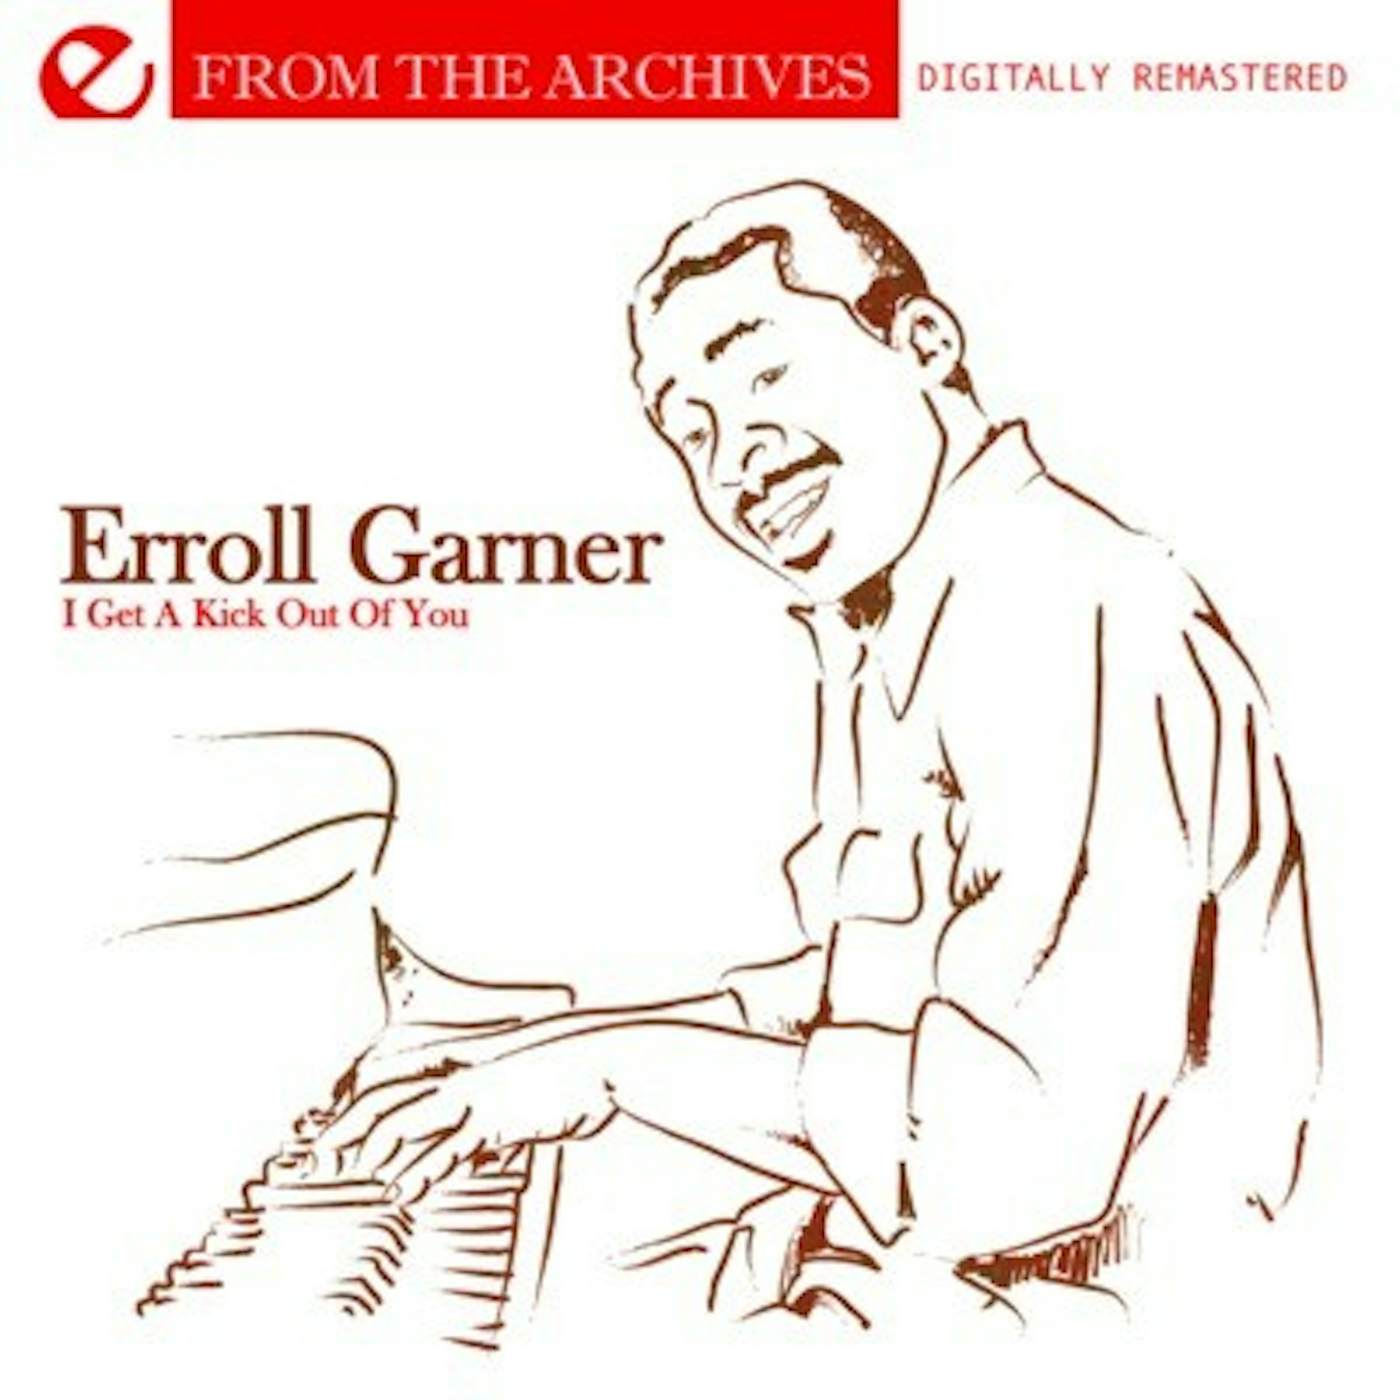 Erroll Garner I GET A KICK OUT OF YOU - FROM THE ARCHIVES CD